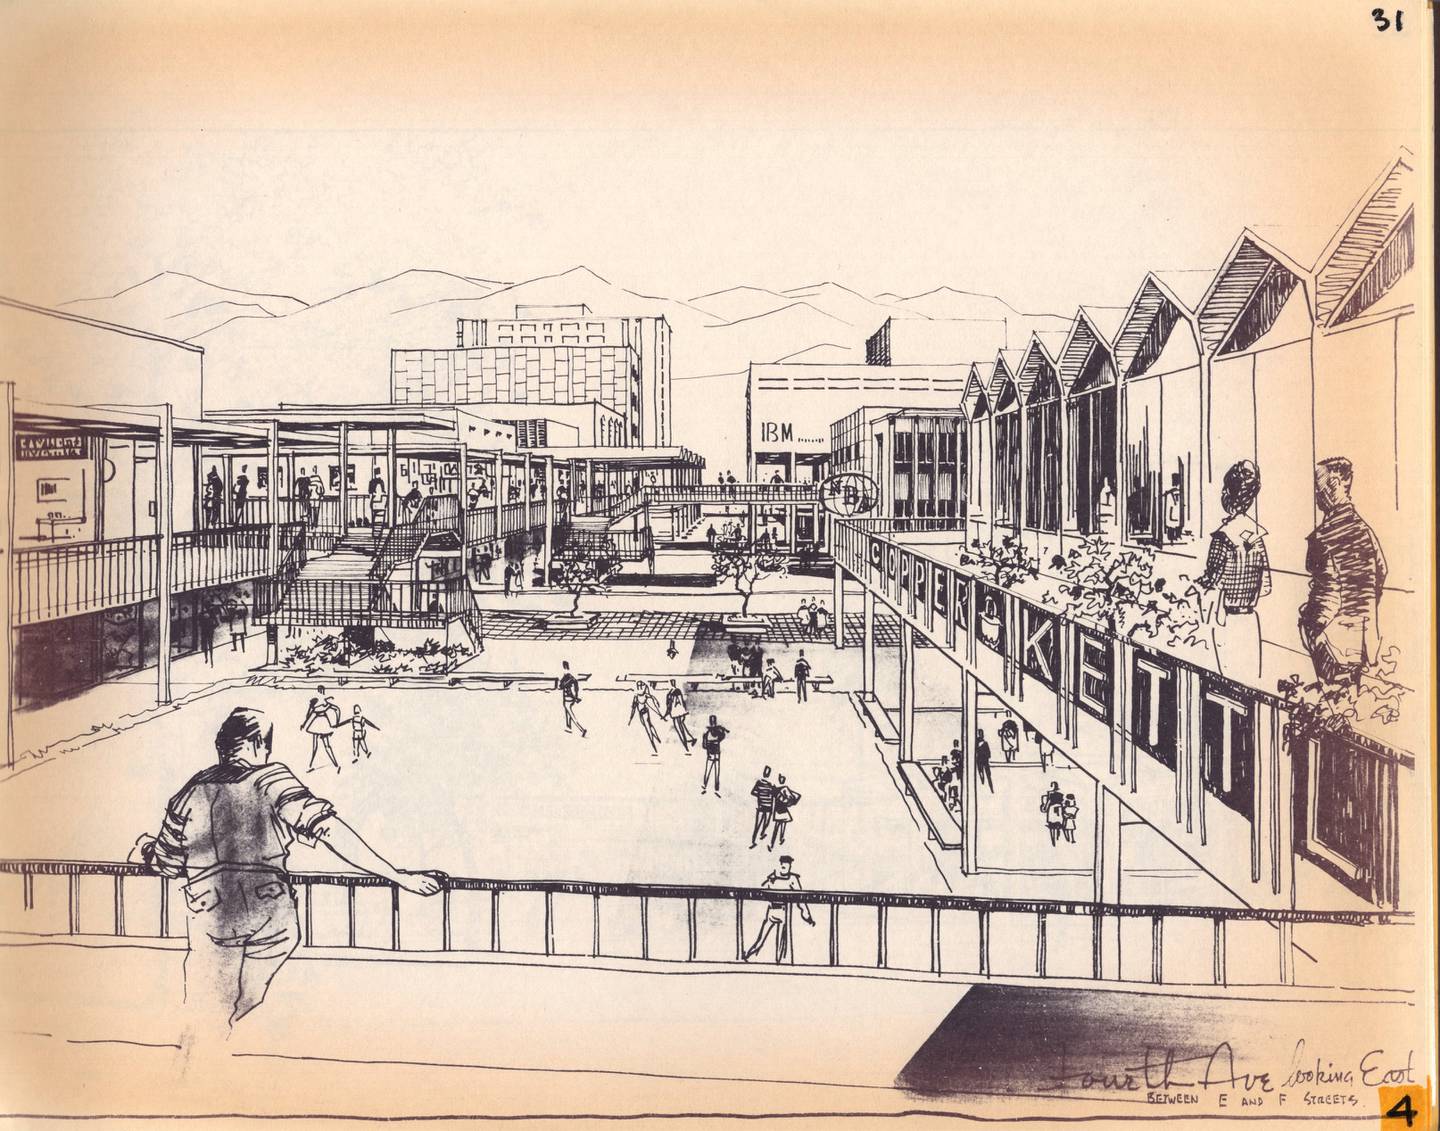 A 1964 drawing for a plan for downtown Anchorage from Fourth Avenue looking east between E and F Streets with ice rink